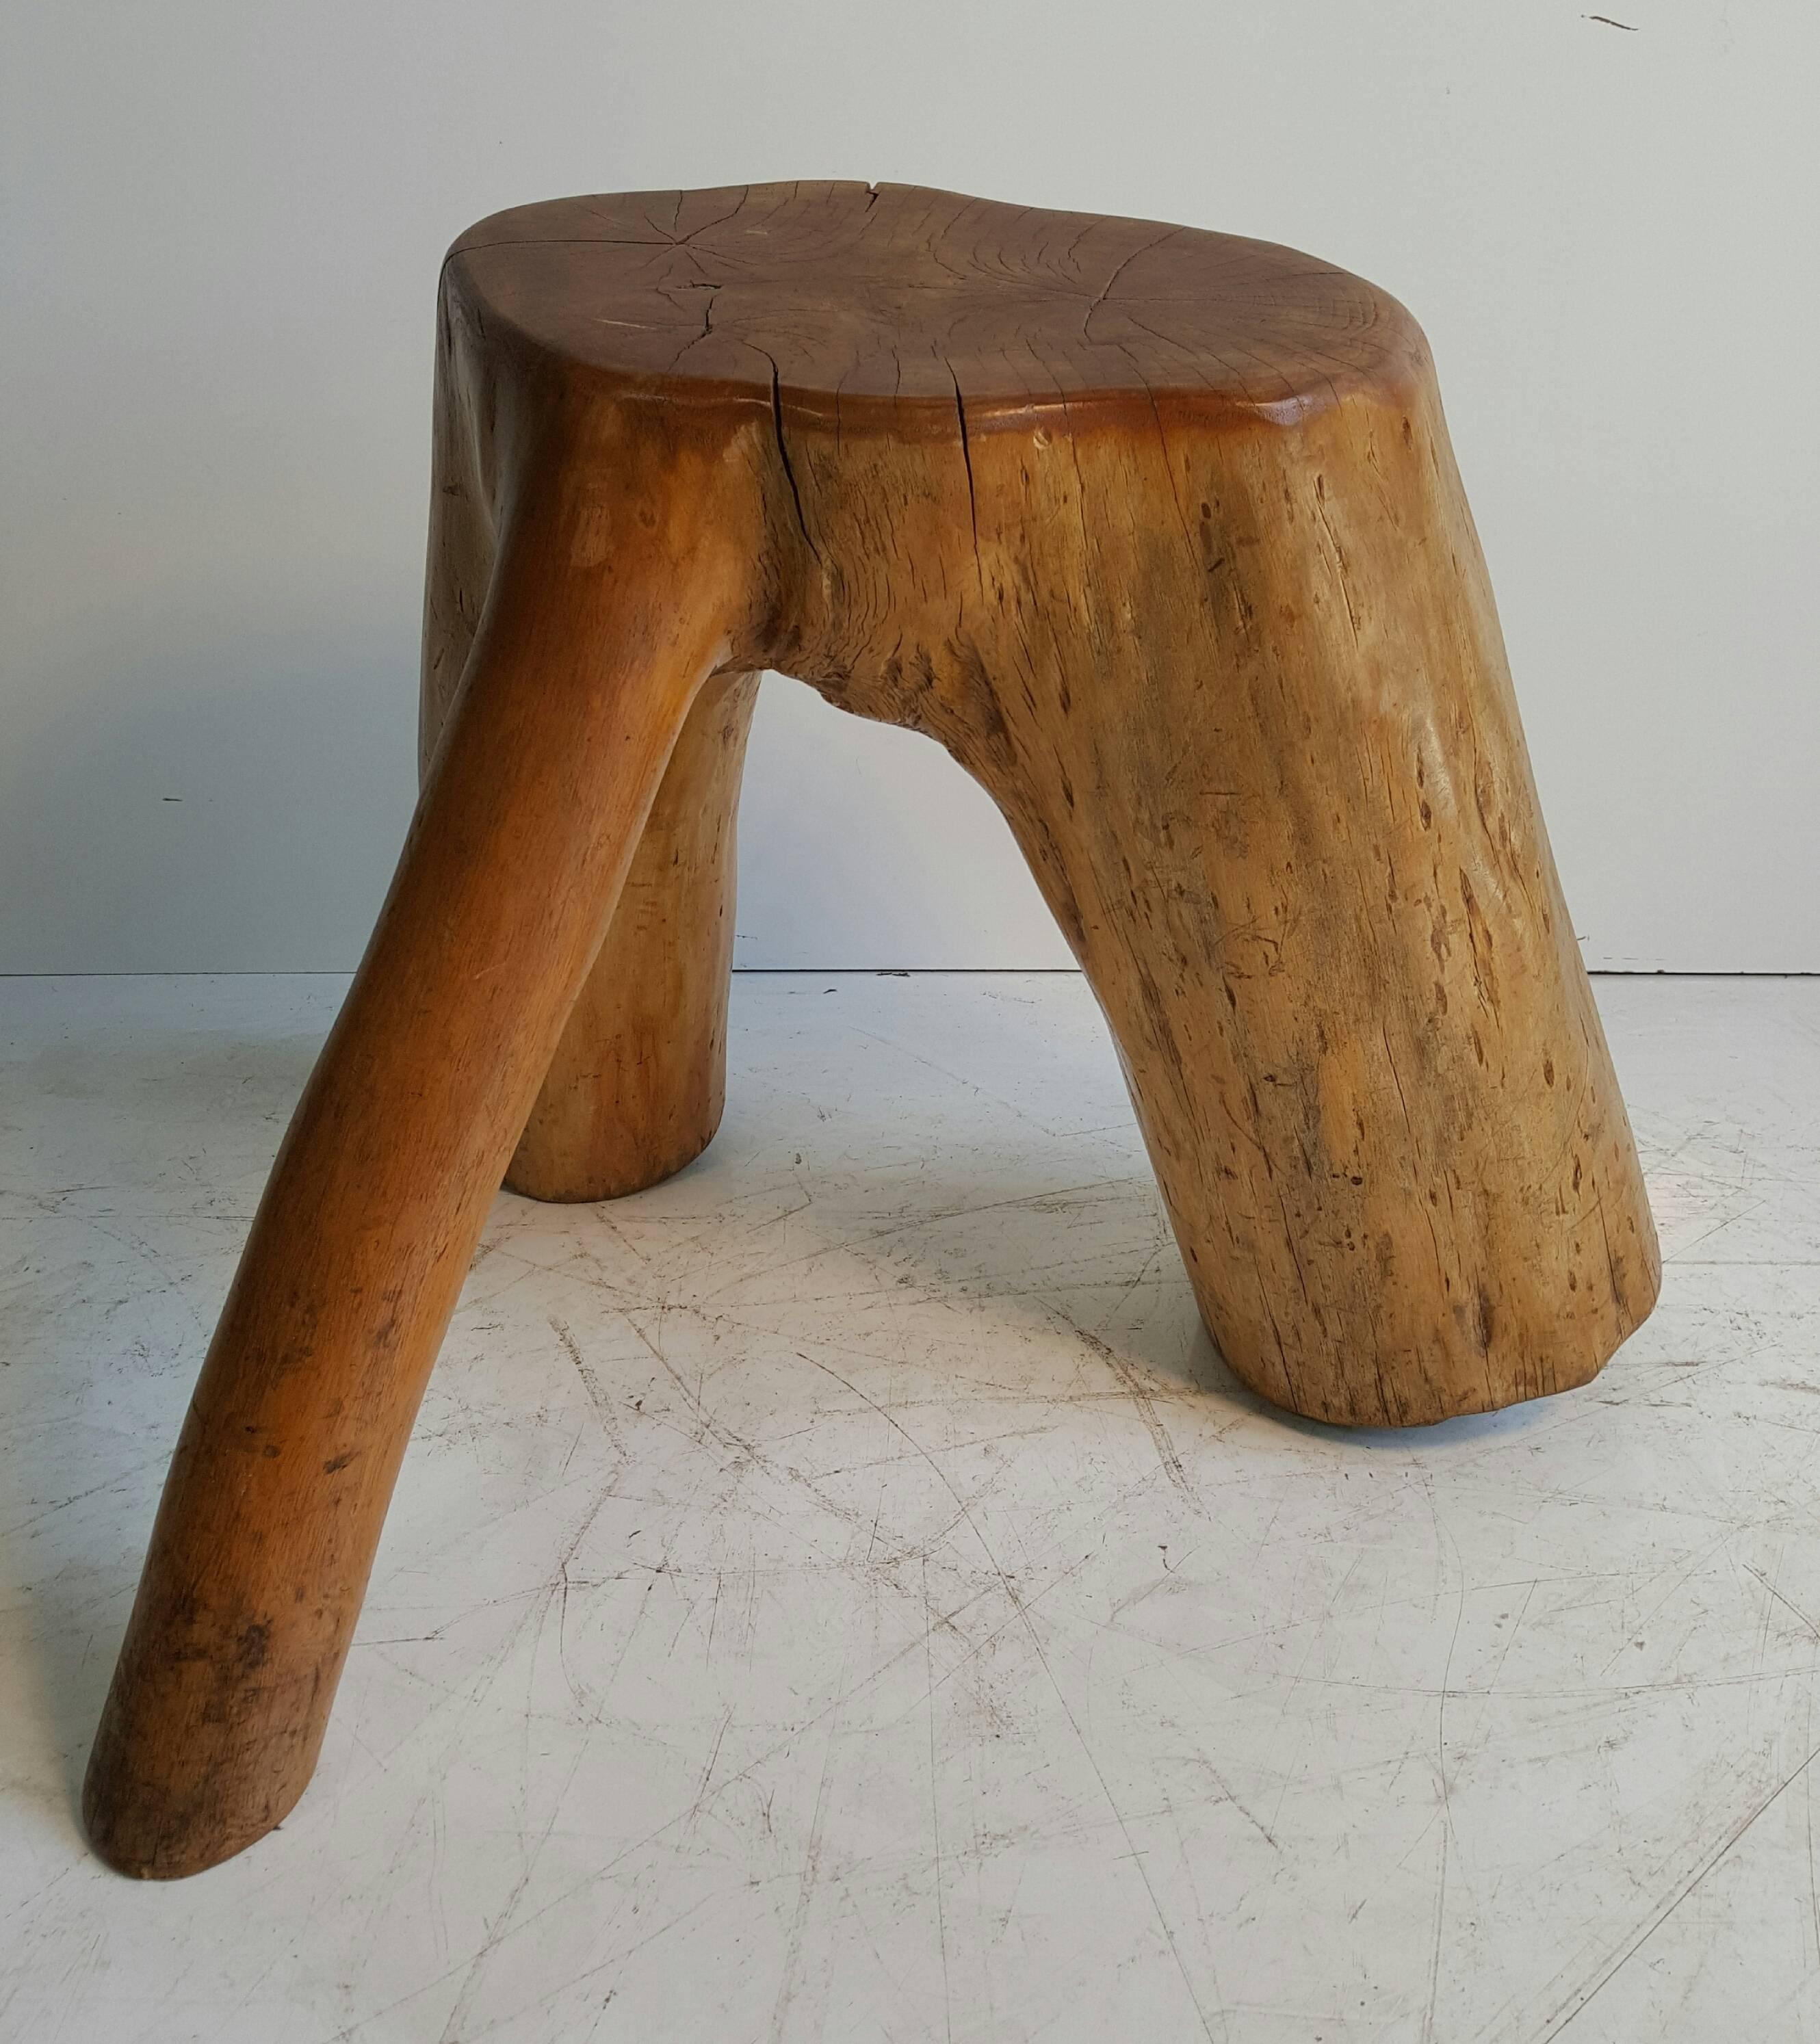 Organic free-form solid burl wood stool /stump. Nice simple modernist design, retains original turquoise stone detail embedded into top.